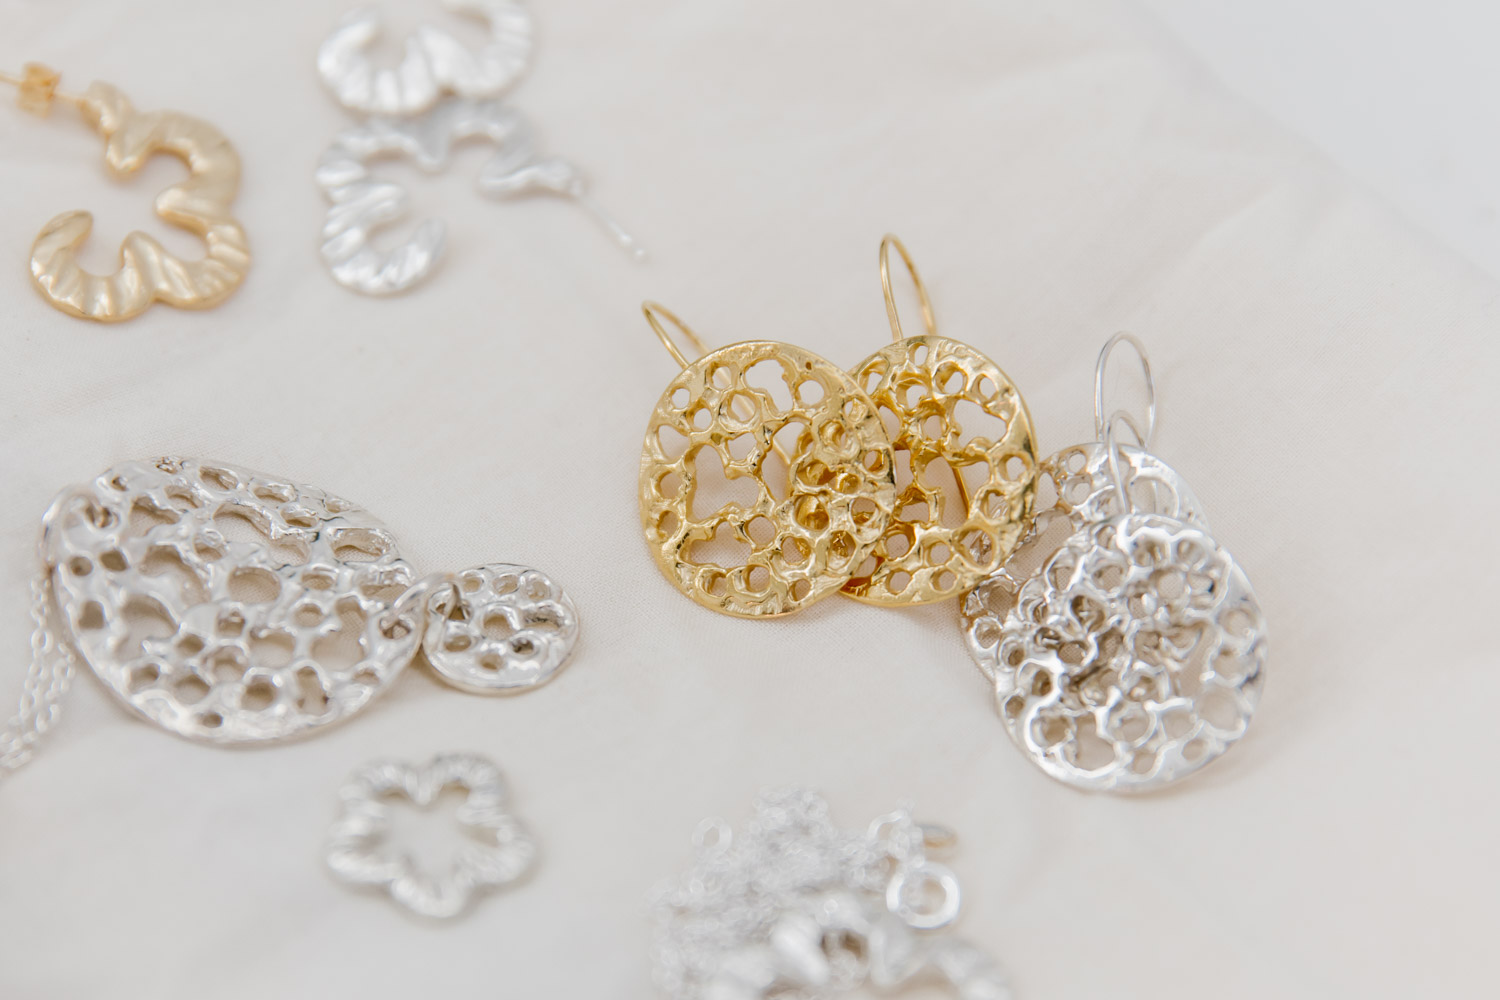 Organic earring designs created by Jane Jones Jewellery in silver and gold